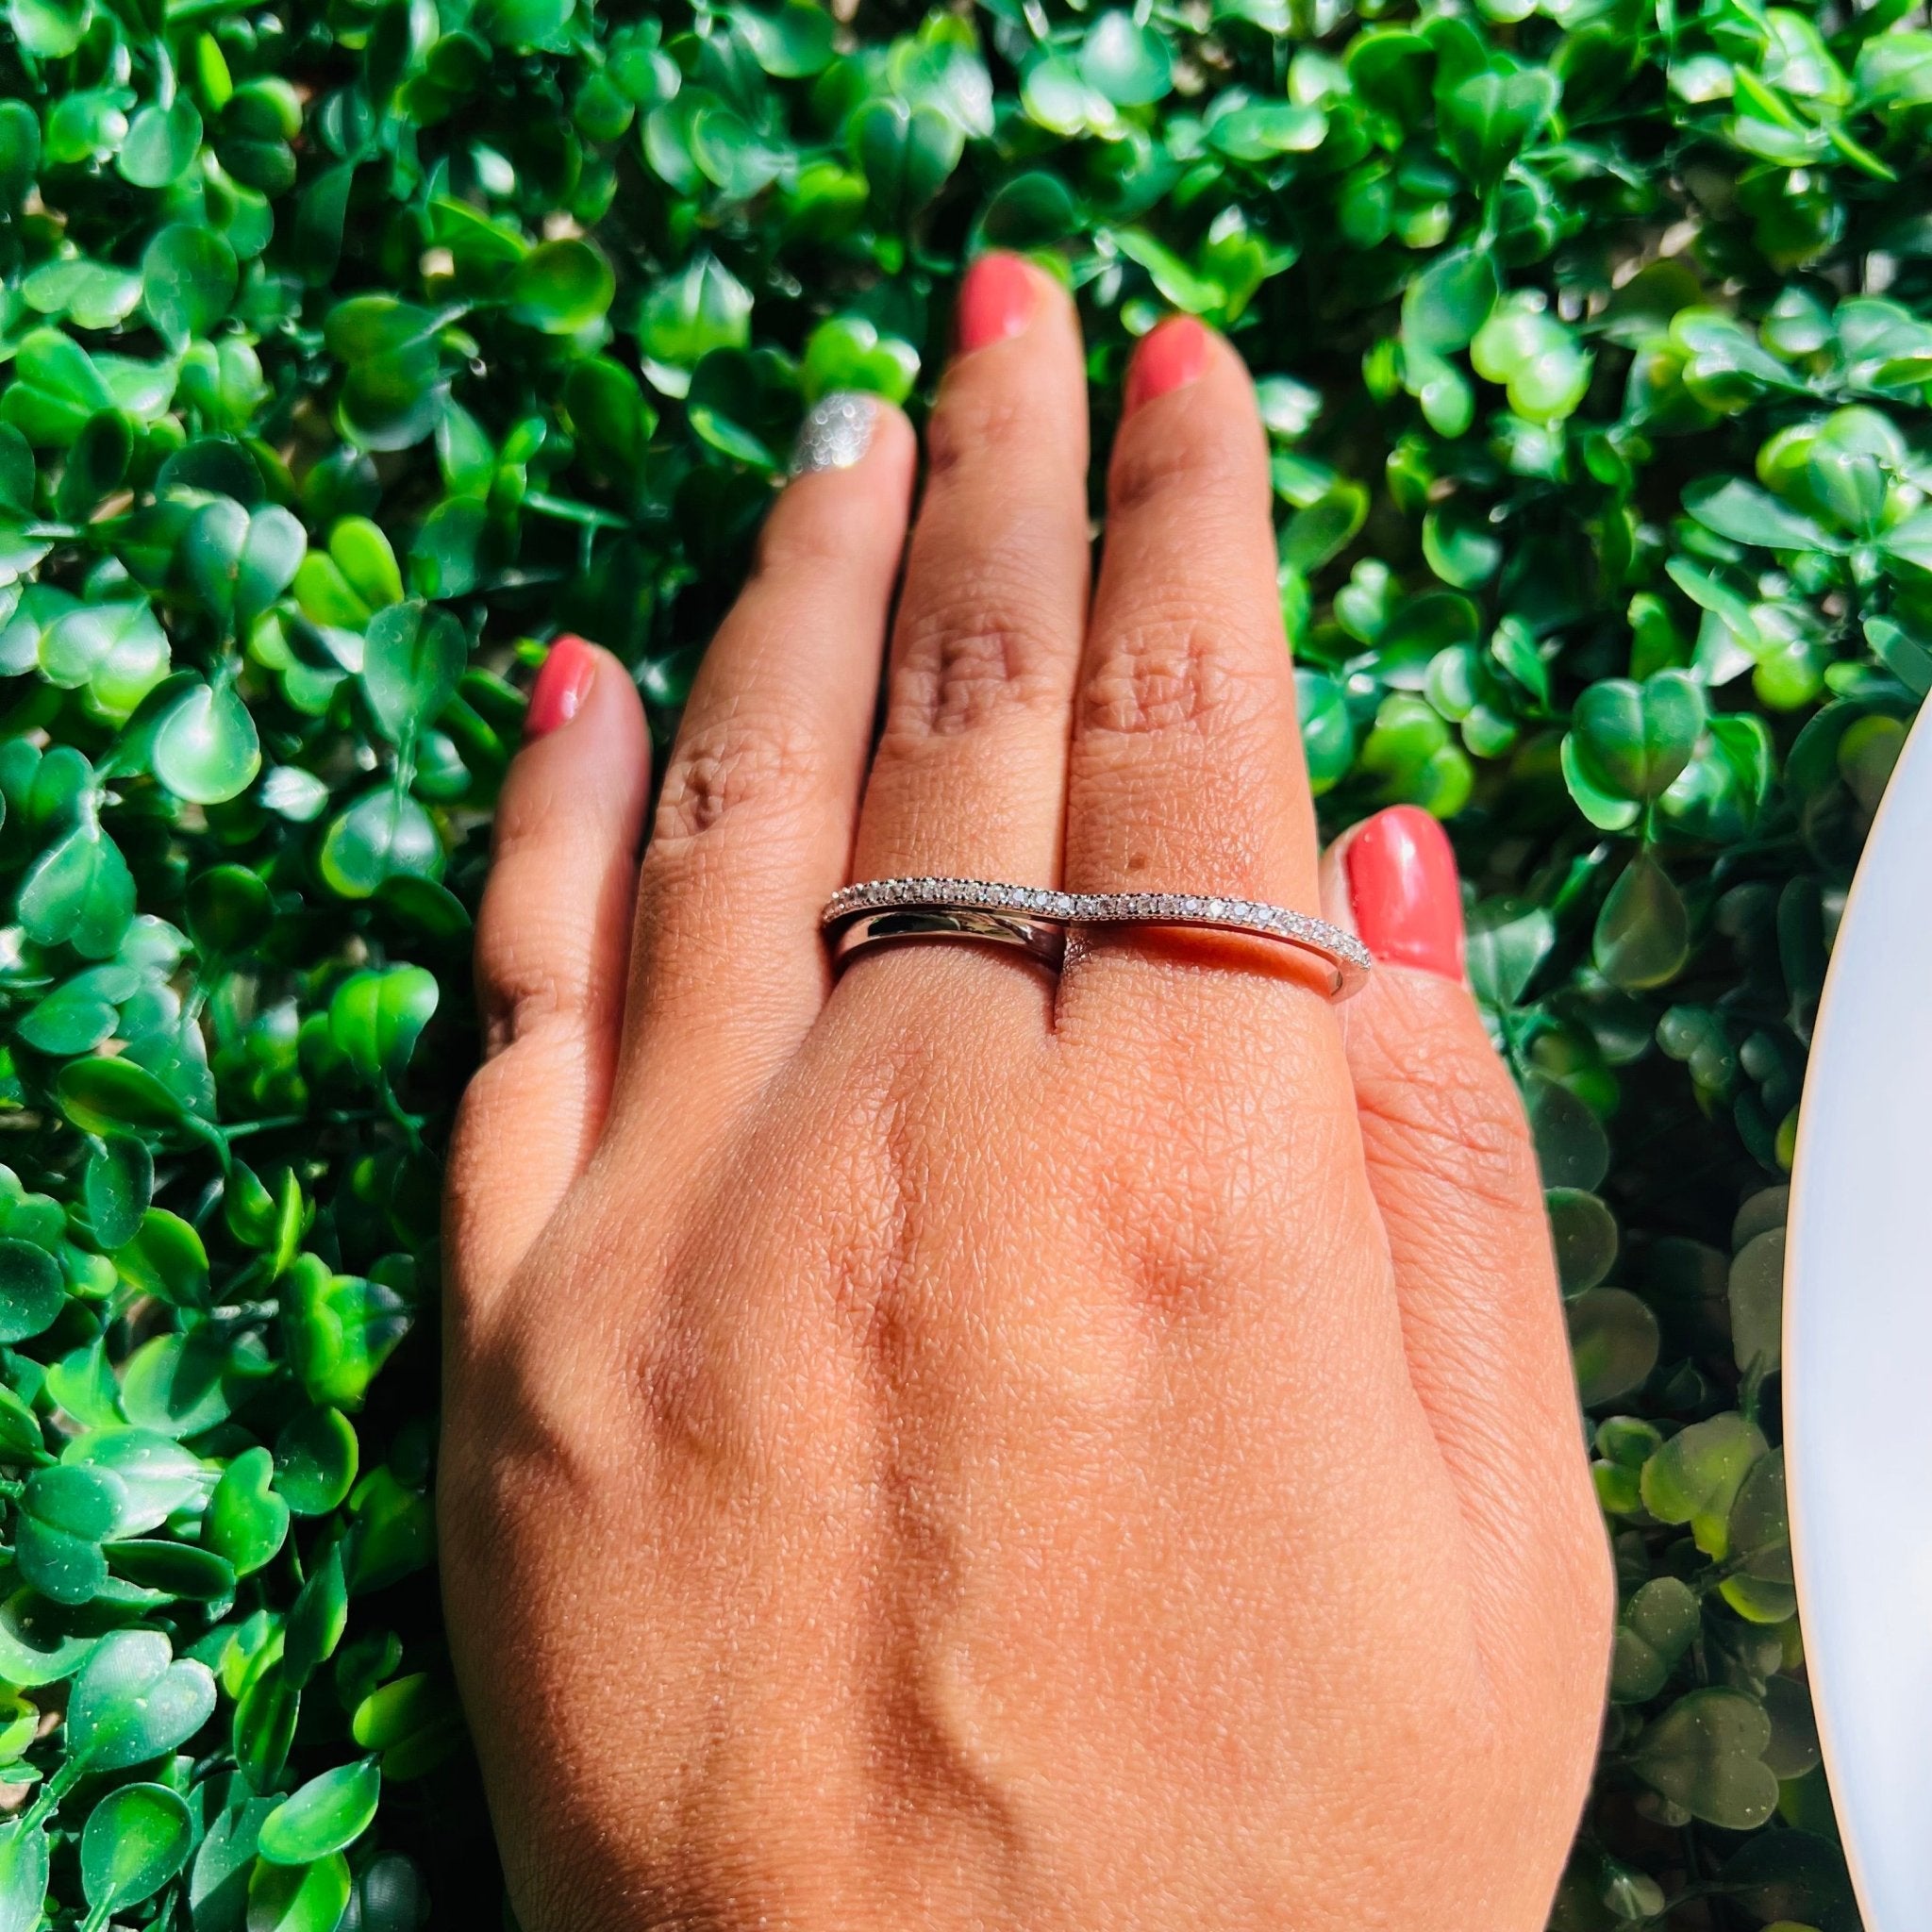 Silver Band Ring | Christian Rings | Jewelry | Elevated Faith